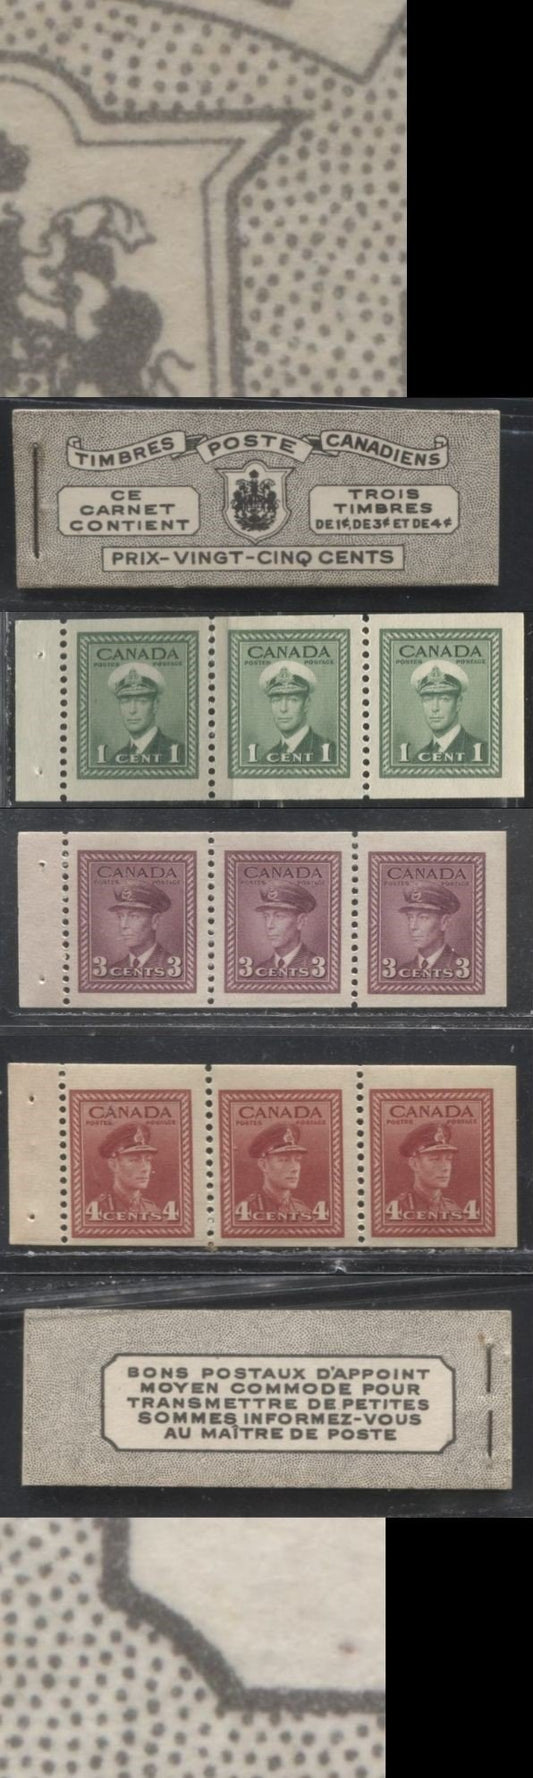 Lot 205 Canada #BK38a 1942-1949 War Issue Complete 25c, French Booklet Containing 1 Pane Each of 3 of 1c Green, 3c Rosy Plum and 4c Carmine Red, Harris Front Cover Type Vd , Back Cover Jviii, 7c & 6c Rate Page